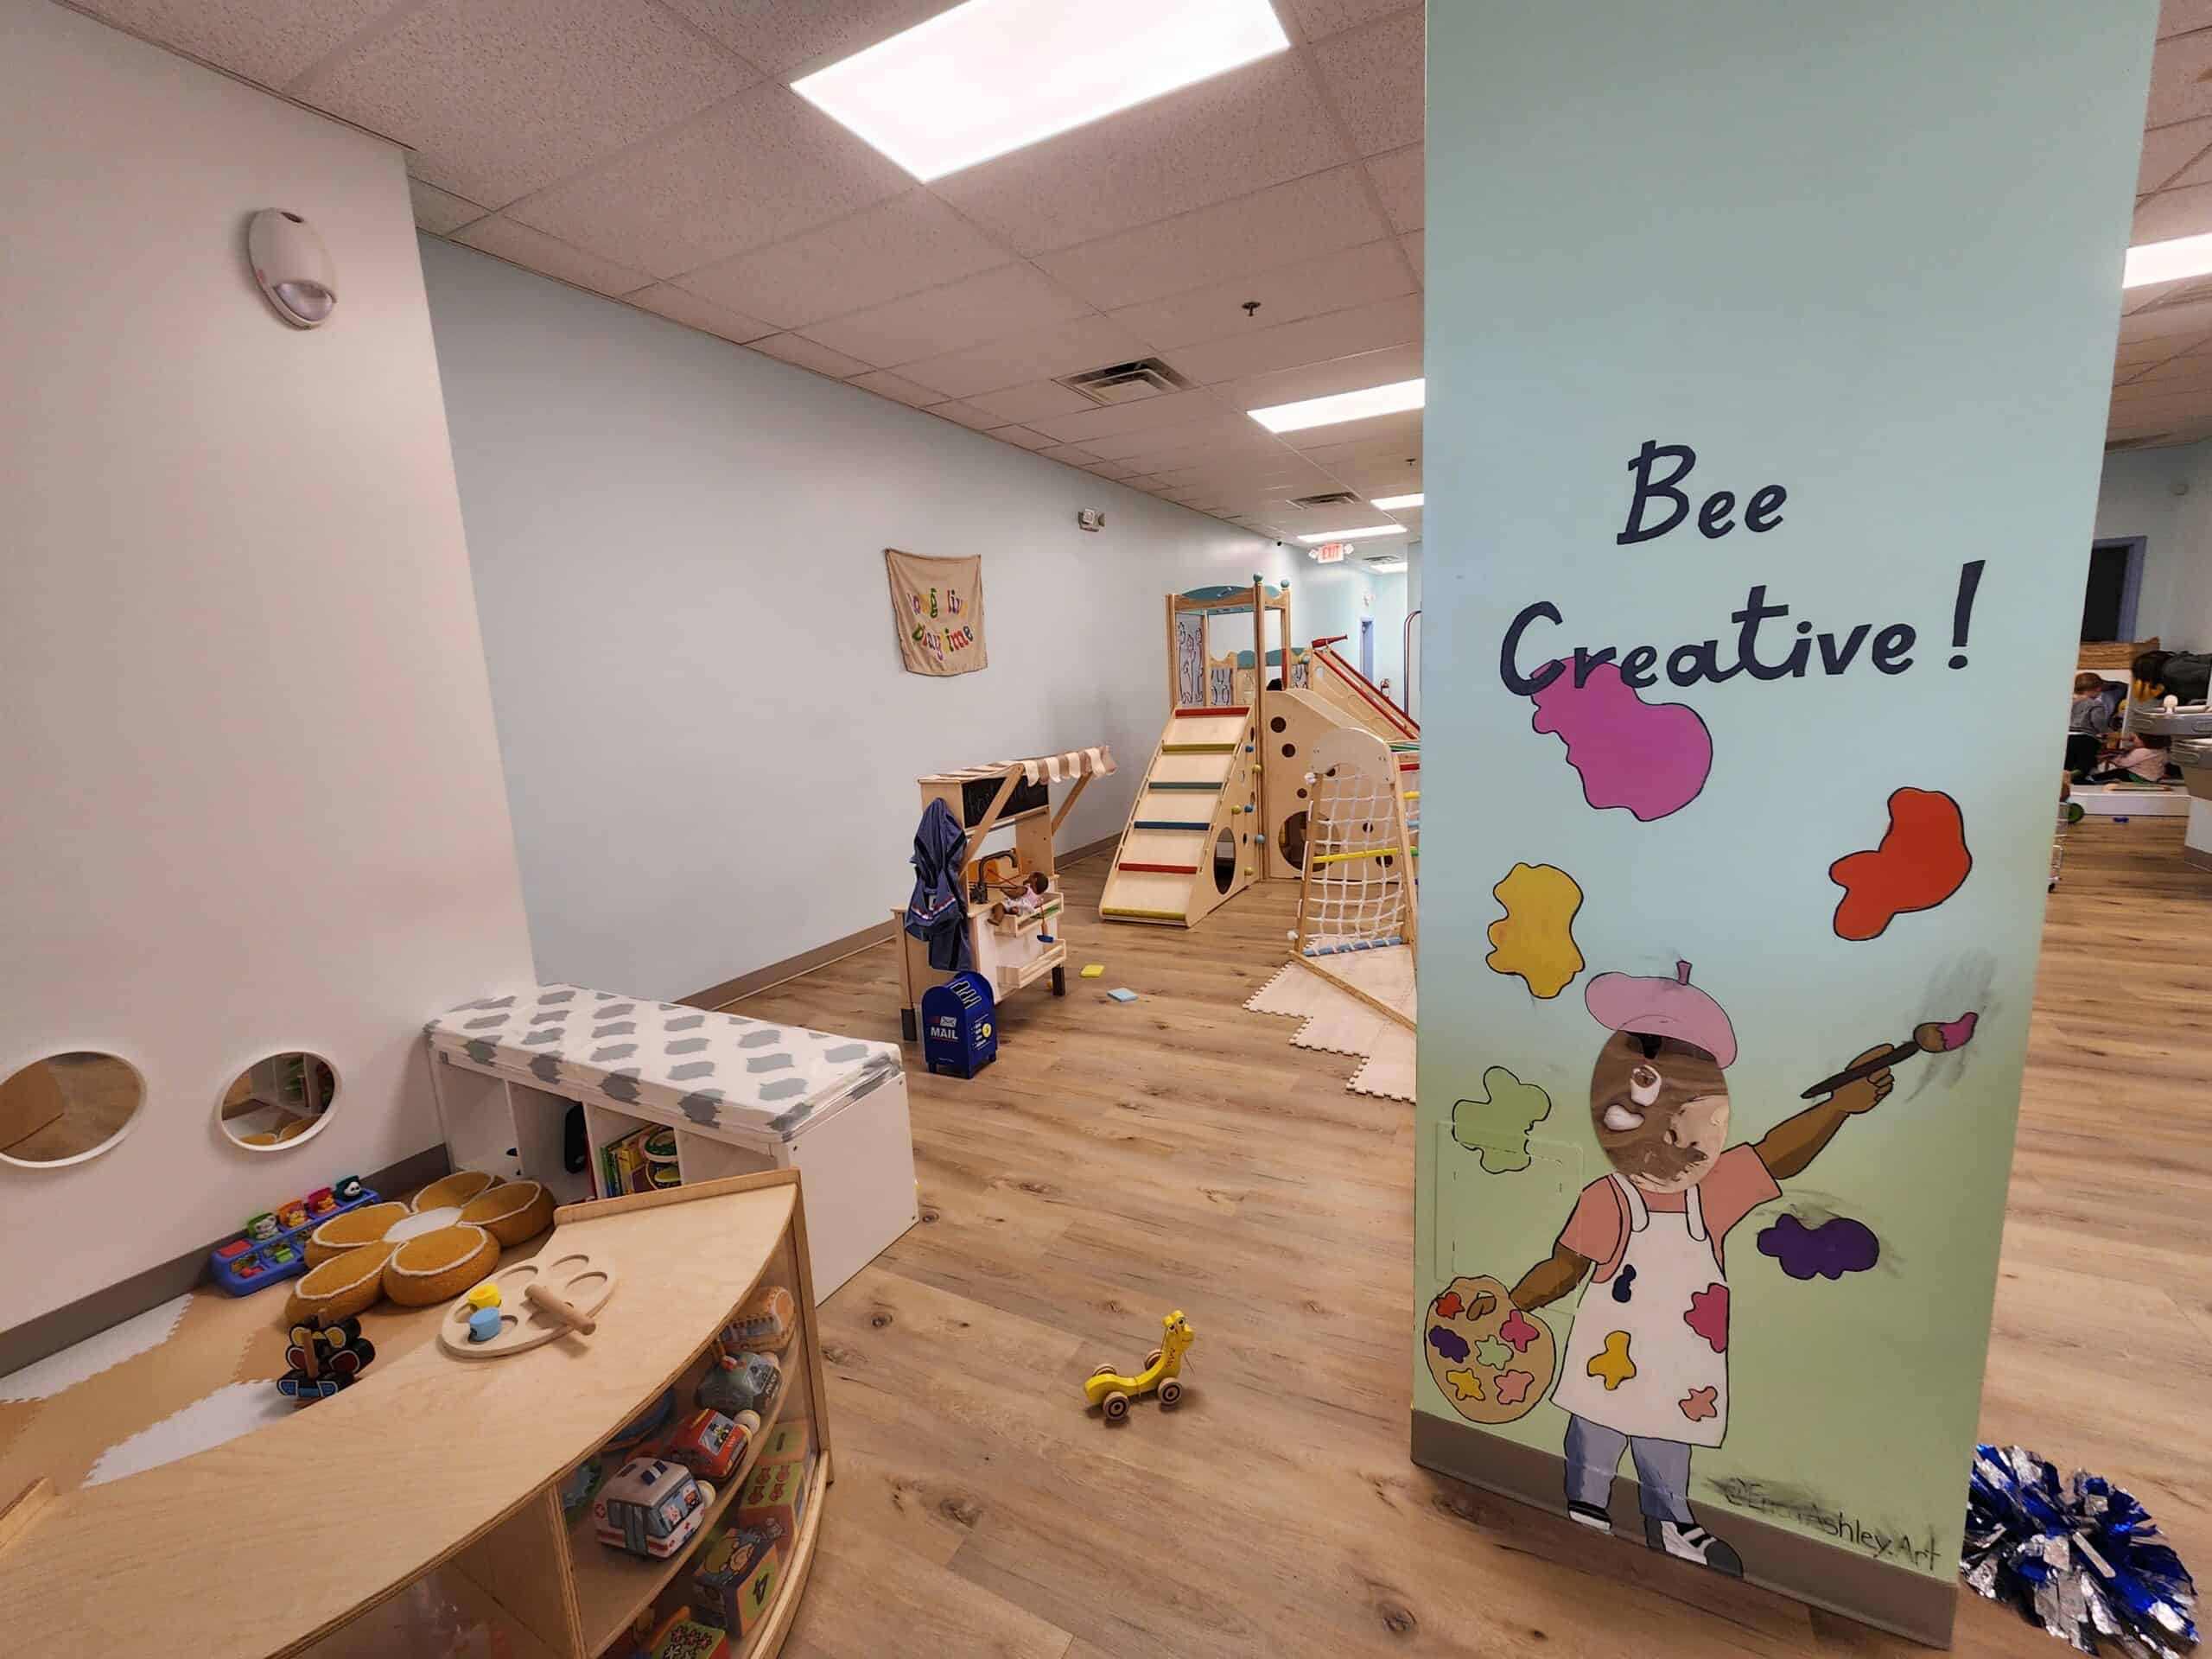 Creative play area at Bumble Brews indoor playground in Raleigh, NC, featuring a playful mural with 'Bee Creative!' slogan, and a variety of interactive toys and structures for children's imaginative play.